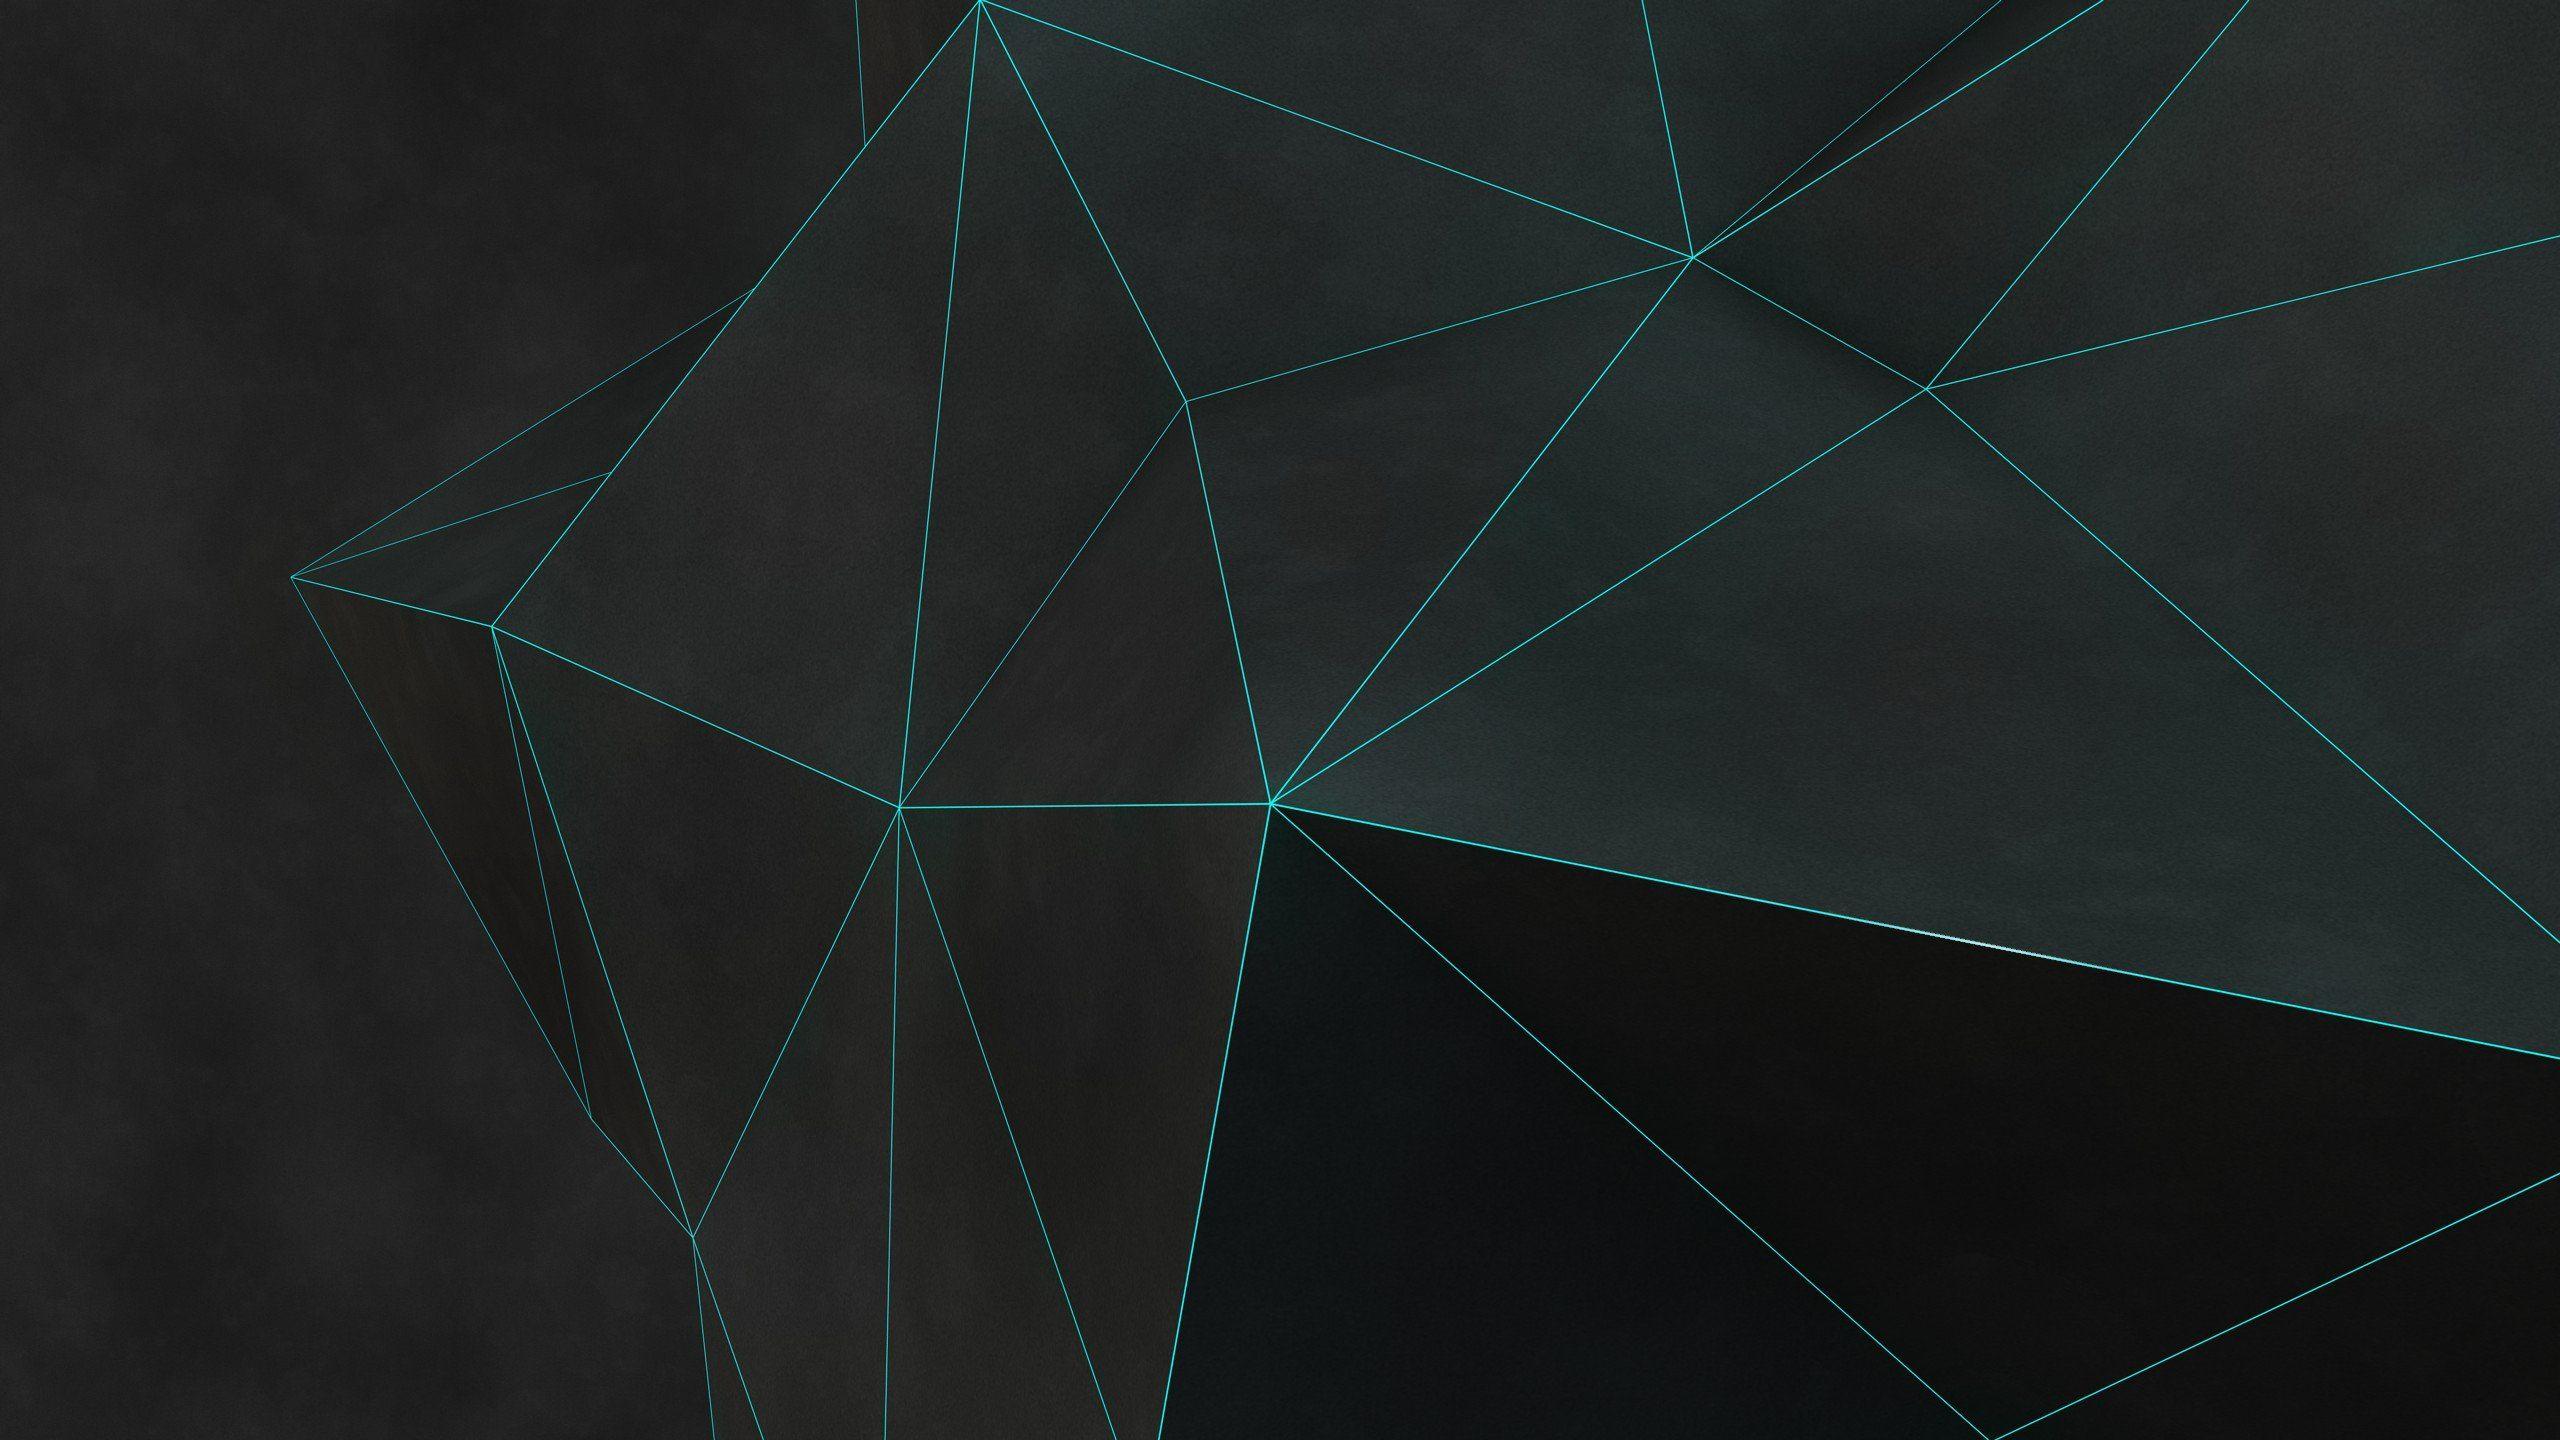 Geometric Triangle HD Backgrounds Wallpapers 24837